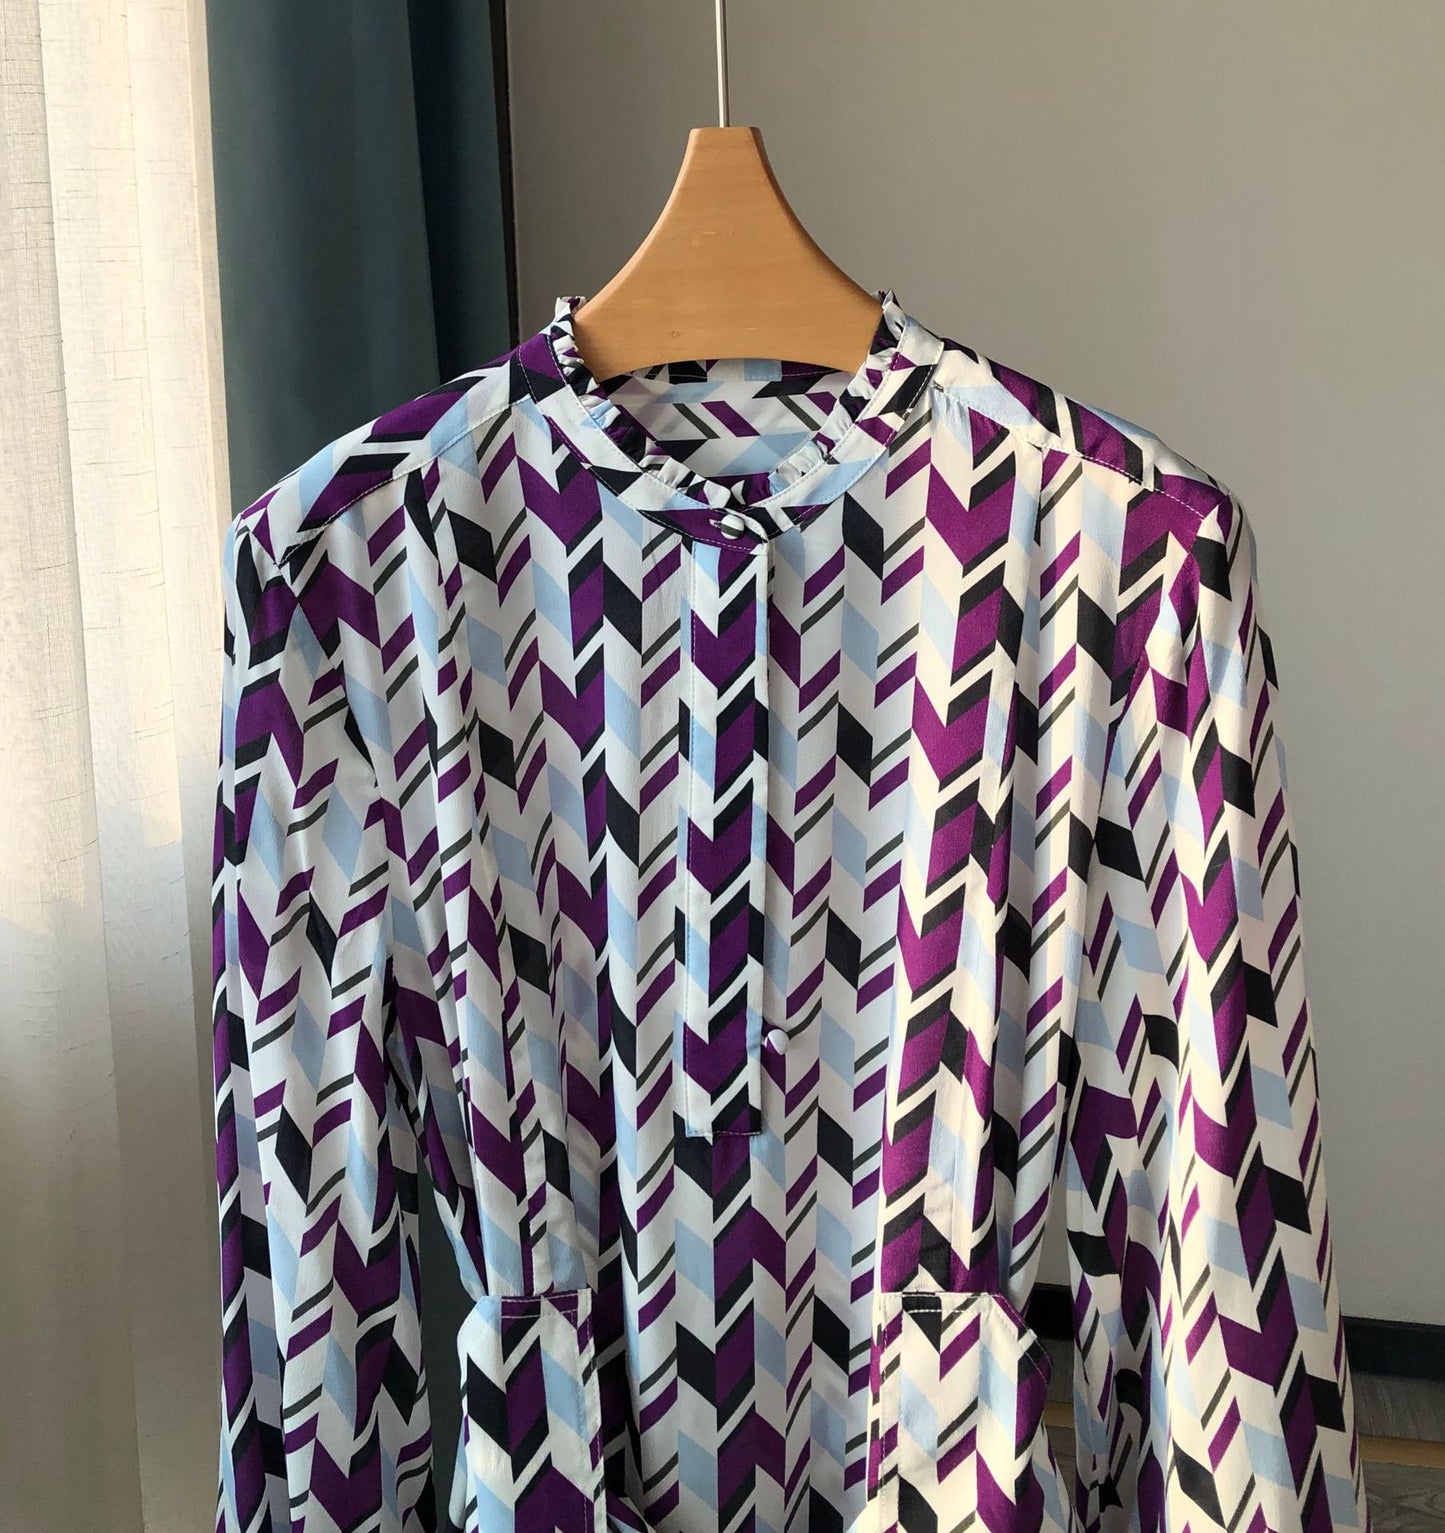 Retro Geometric Arrow Print Silk Dress Loose, Swingy, and Perfect for Spring/Summer